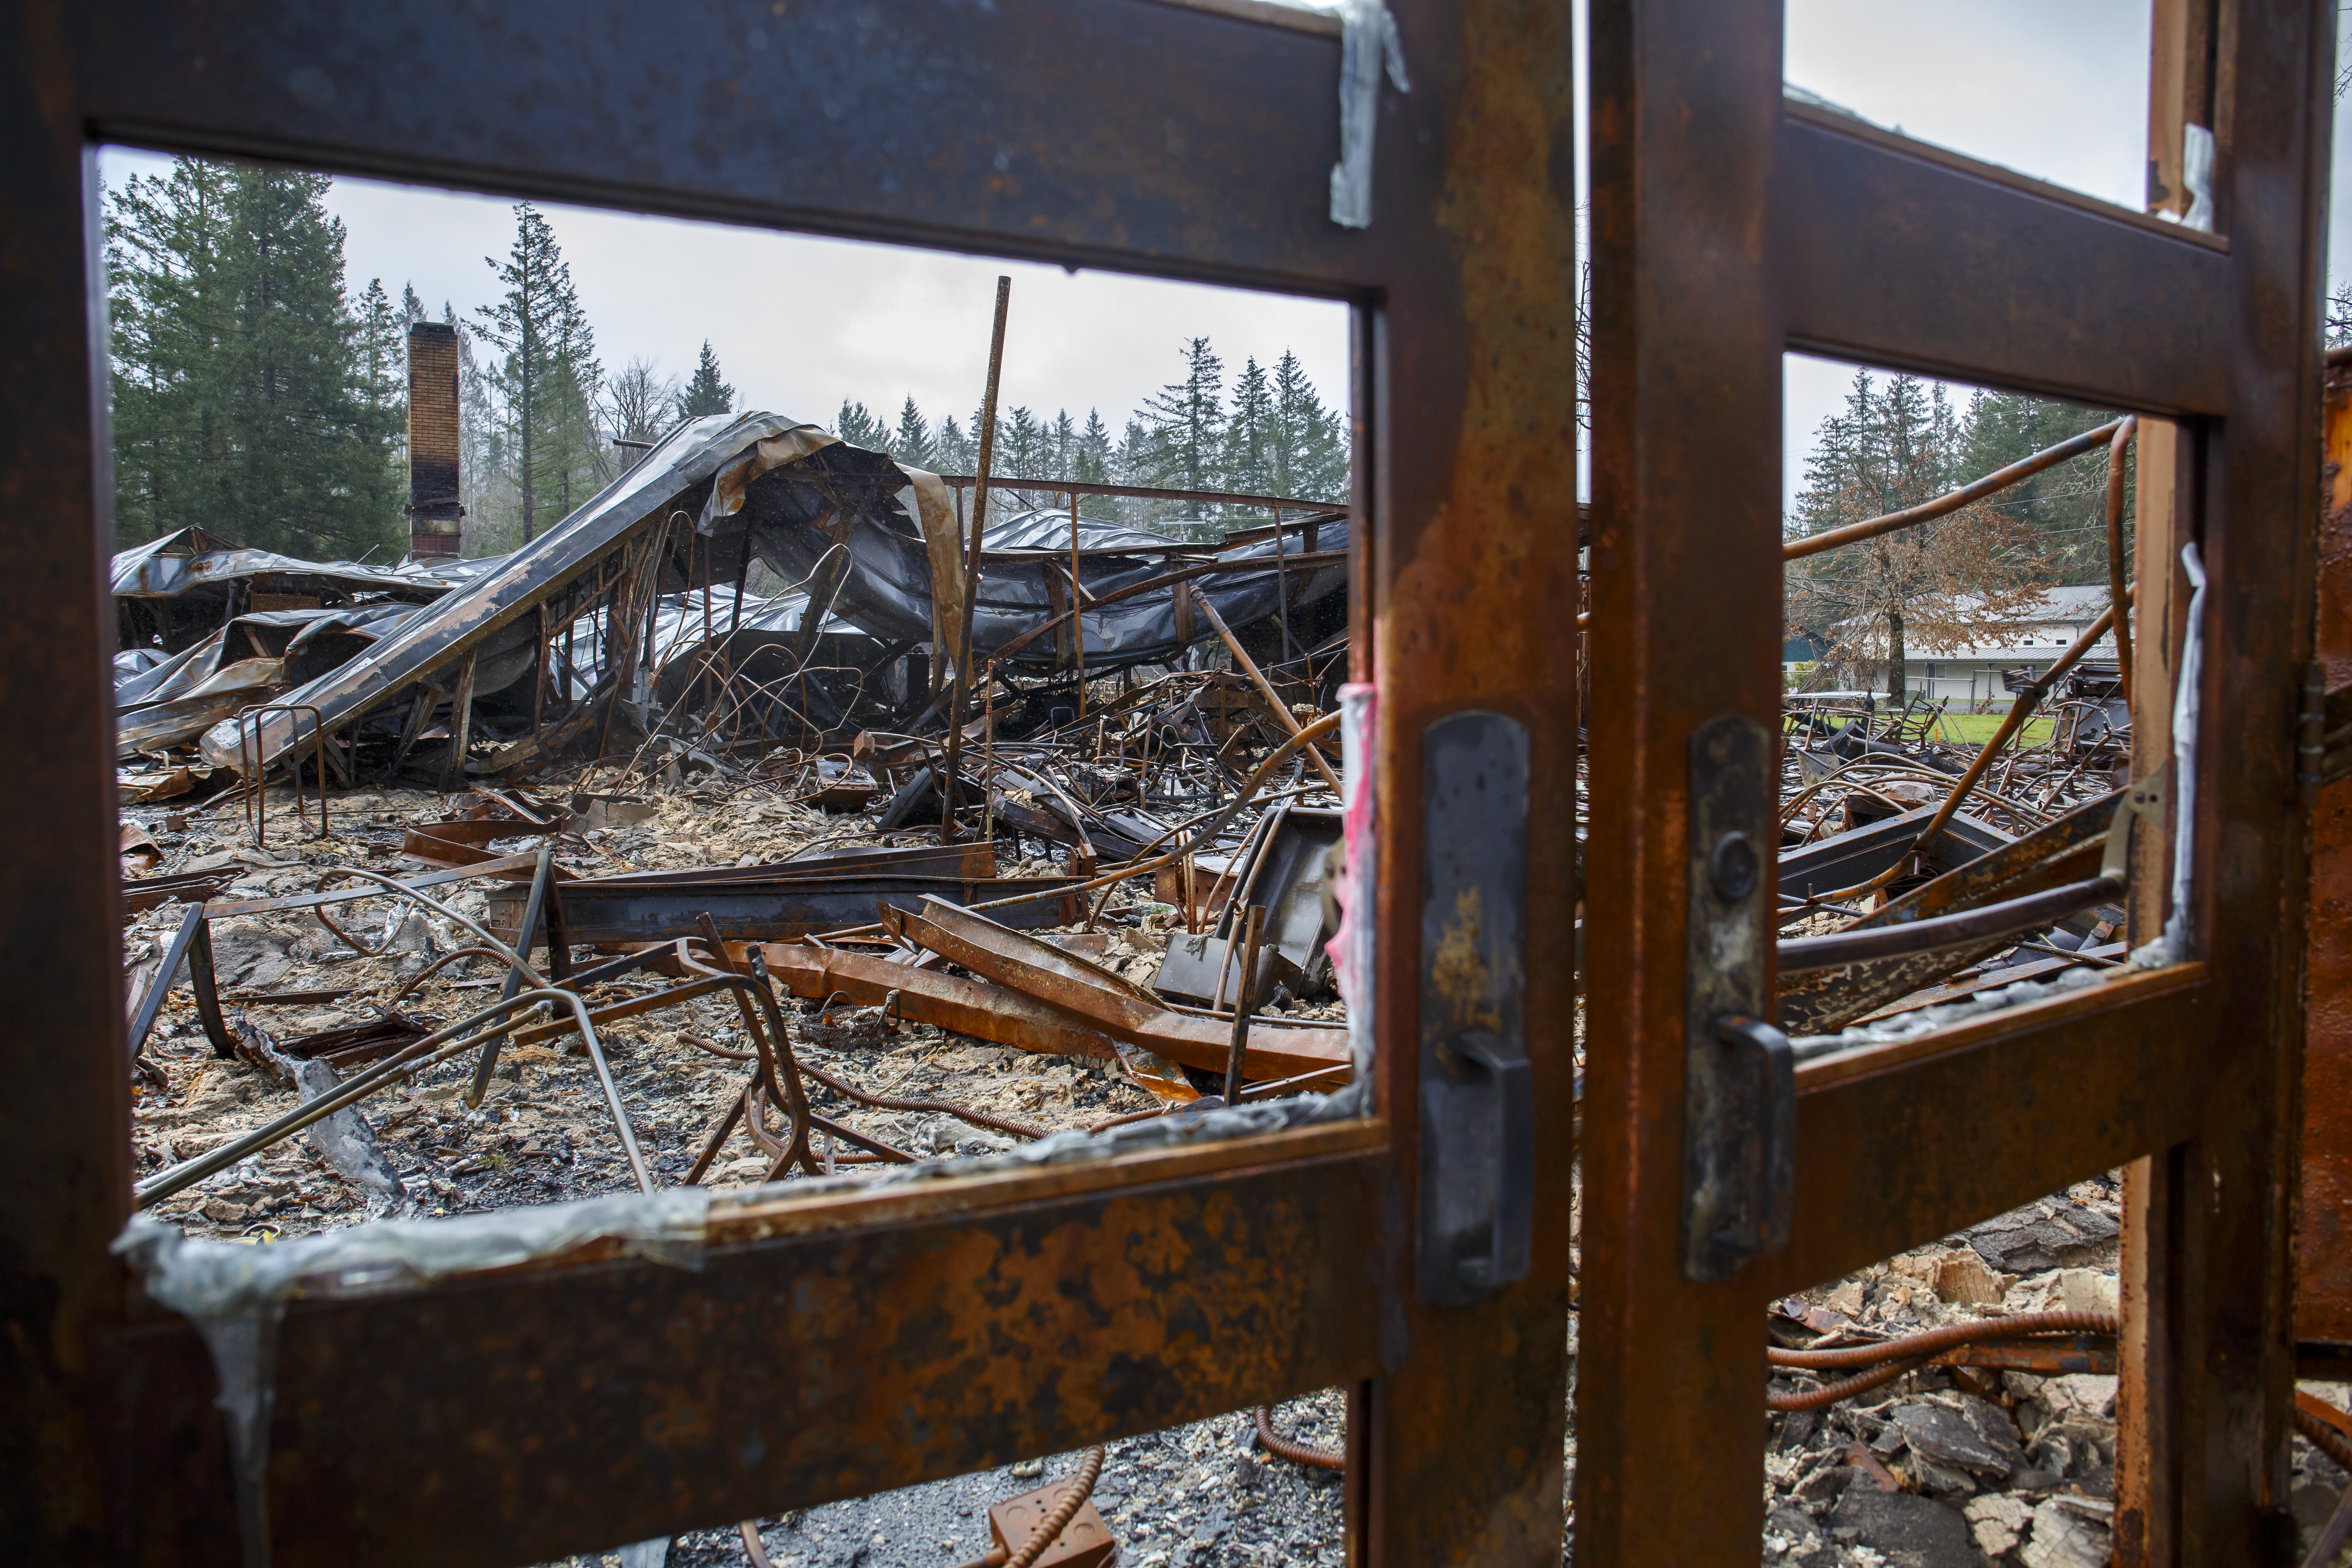 Oregon needs more money to combat wildfires, but lawmakers are split on how  to do it - OPB